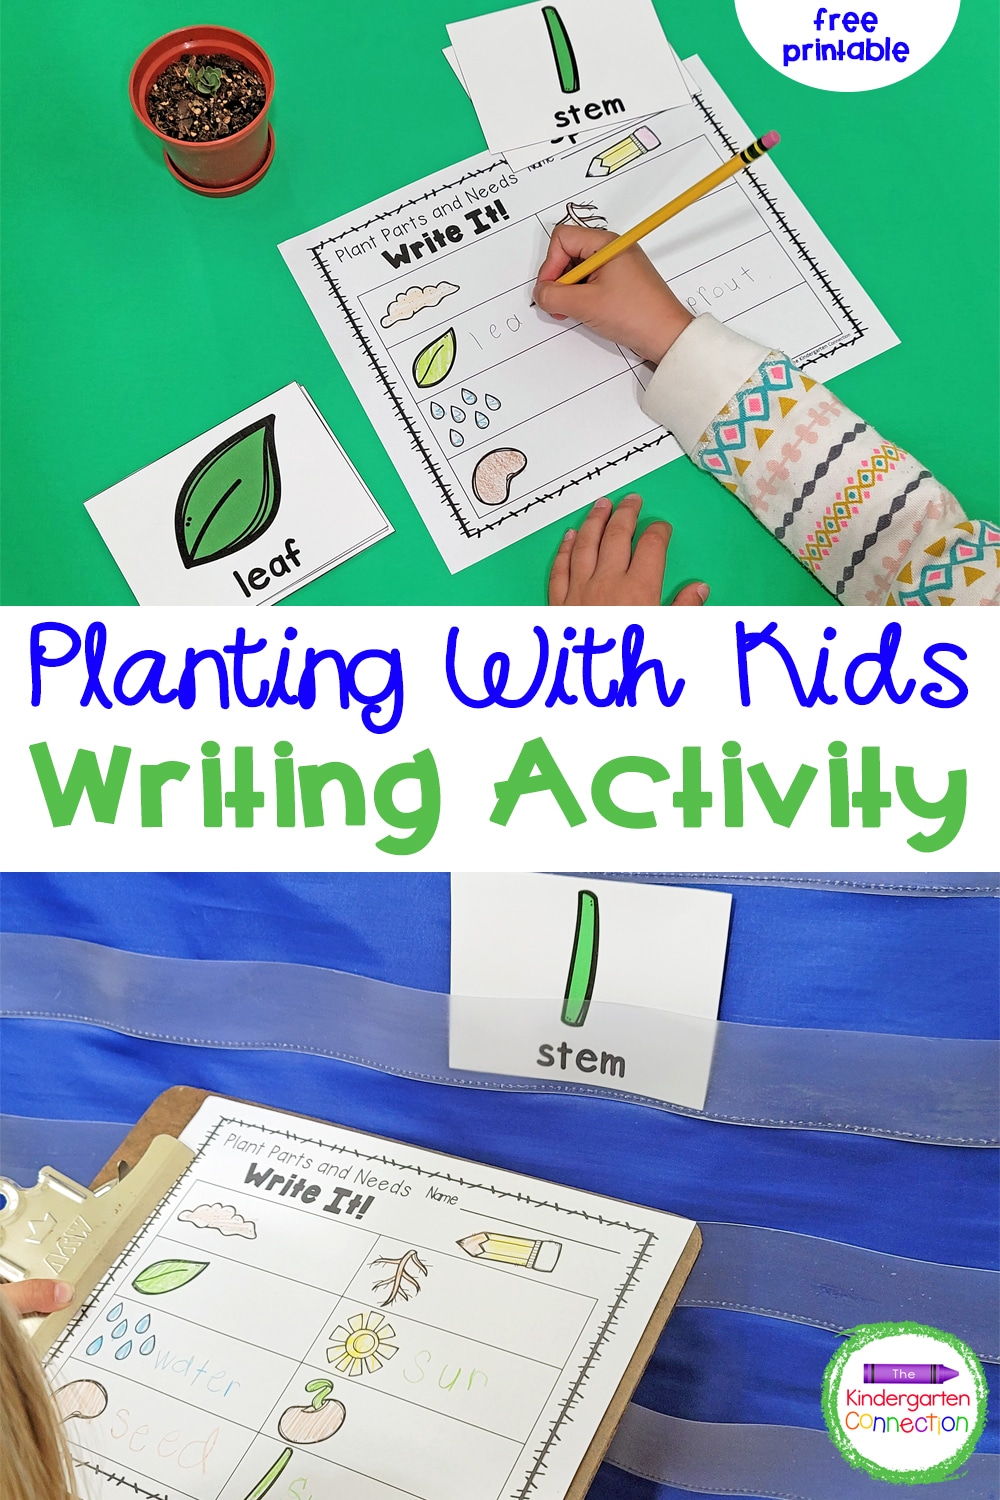 Bring the planting fun into the classroom with this hands-on and free Planting with Kids Writing Activity!